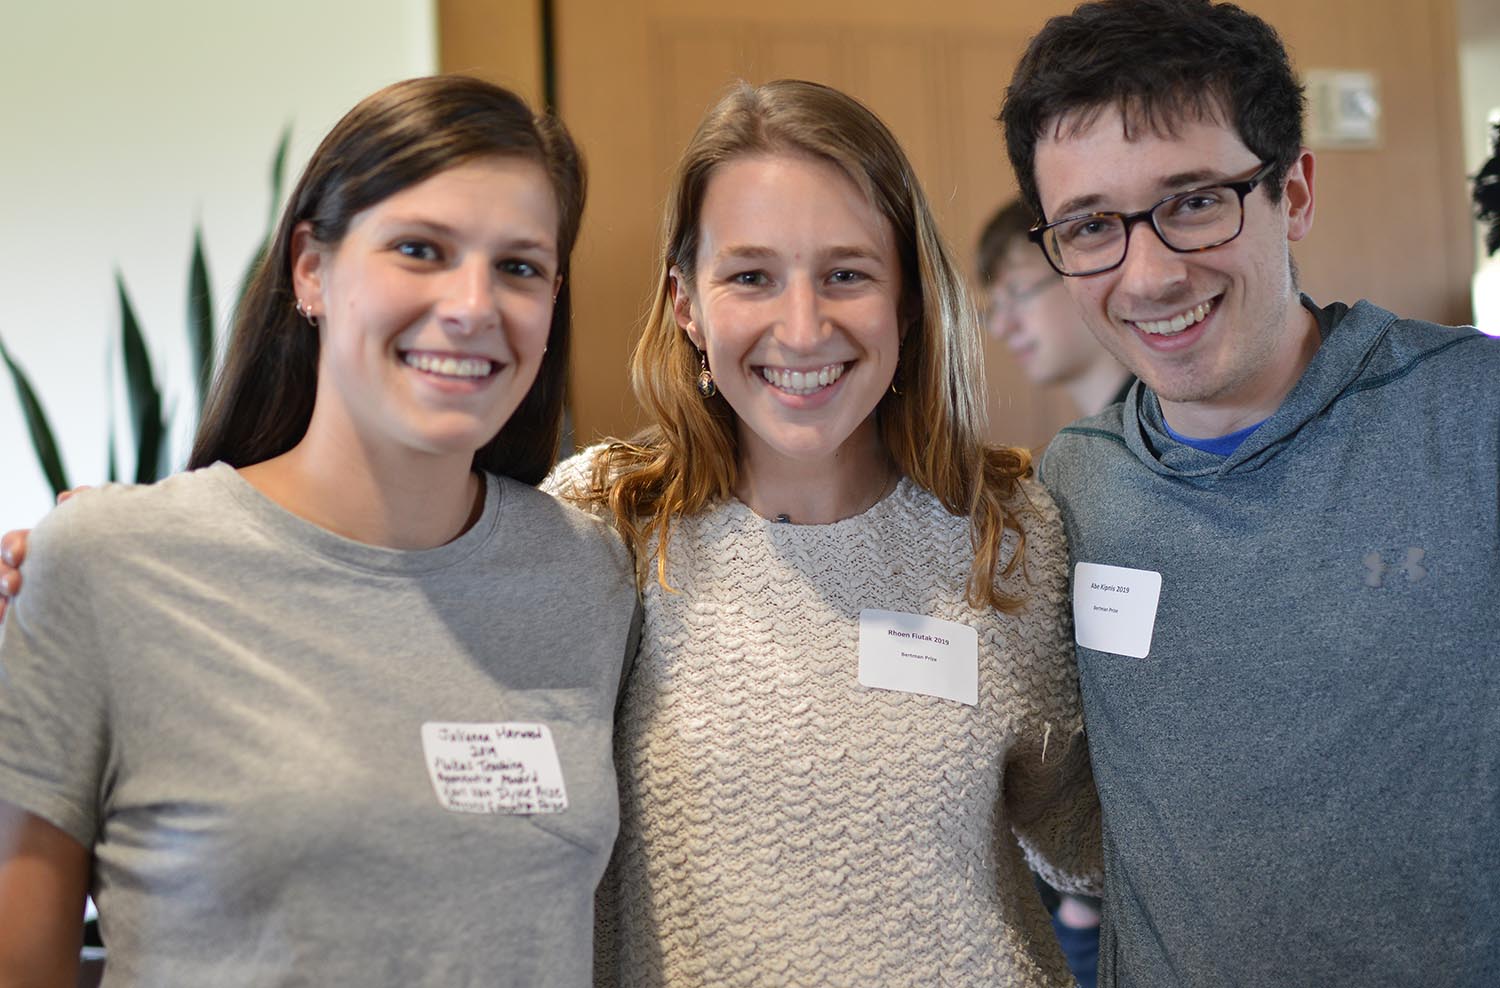 Julianna Harwood '19 received the Plukas Teaching Apprentice Award and the Karl Van Dyke Prize for outstanding achievement in physical science. Rhoen Fiutak '19 and Abe Kipnis '19 won the Bertman Prize for physics. 